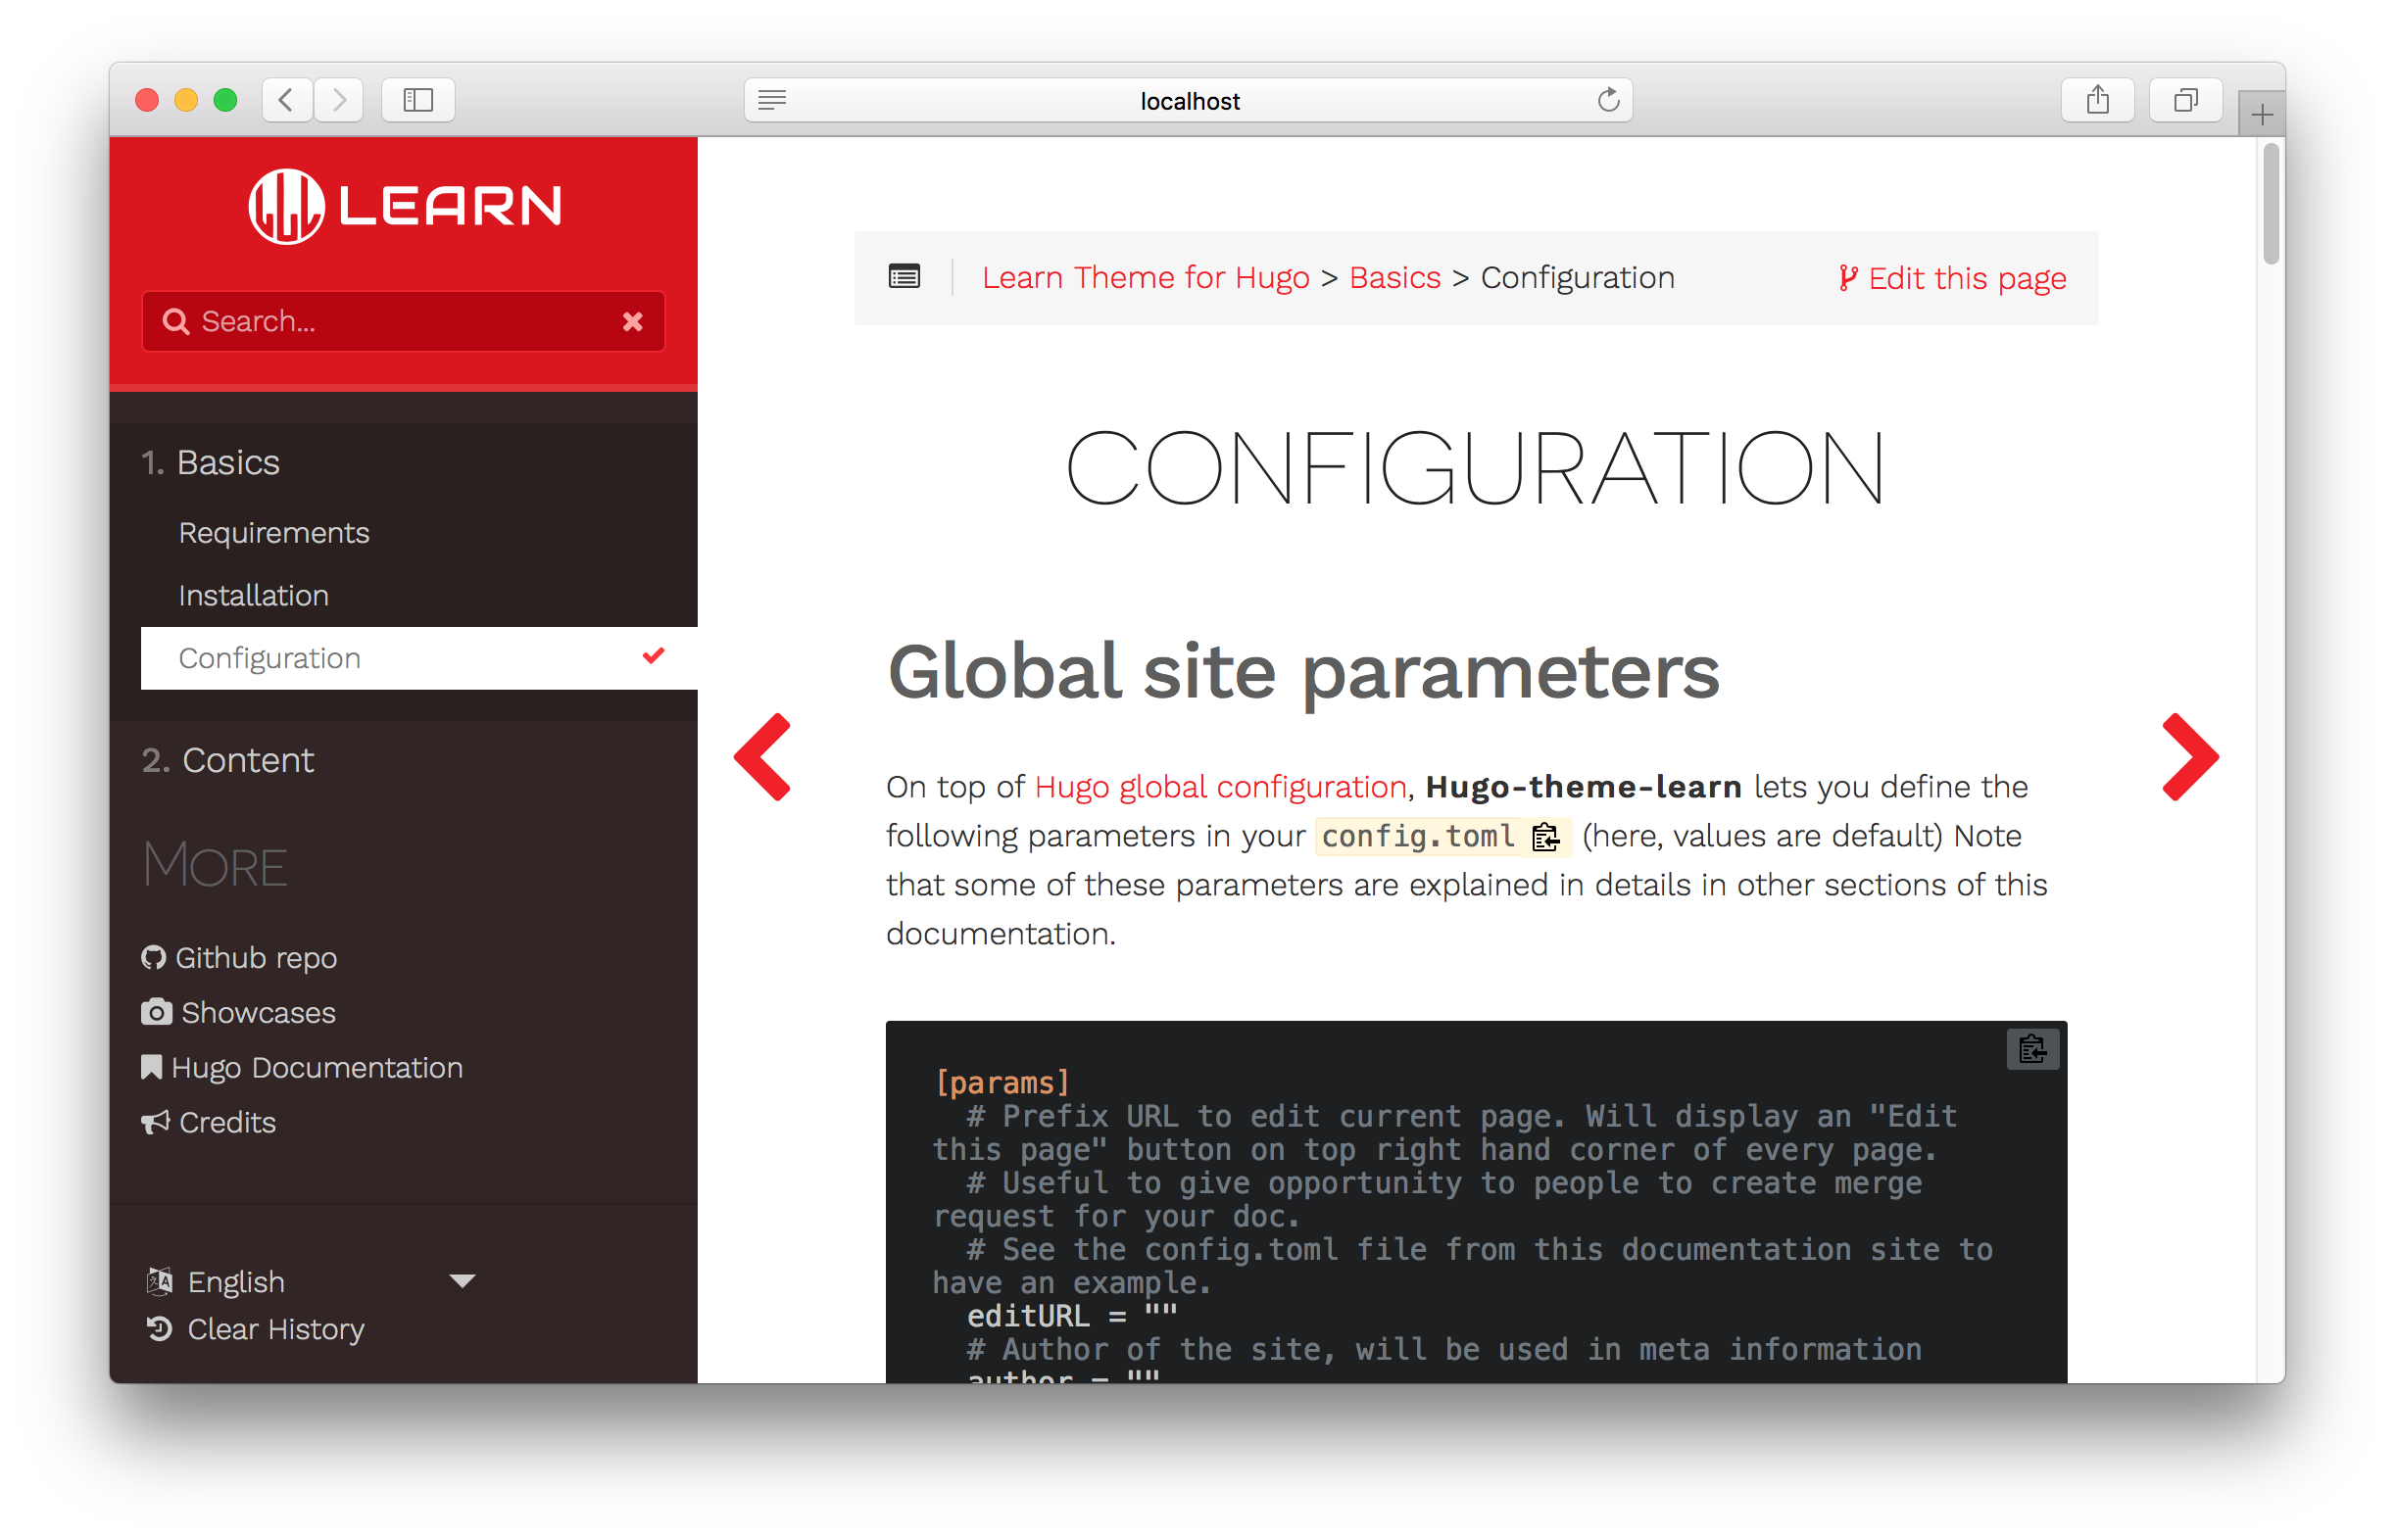 docs/blog/themes/hugo-theme-learn/exampleSite/content/basics/style-customization/images/red-variant.png